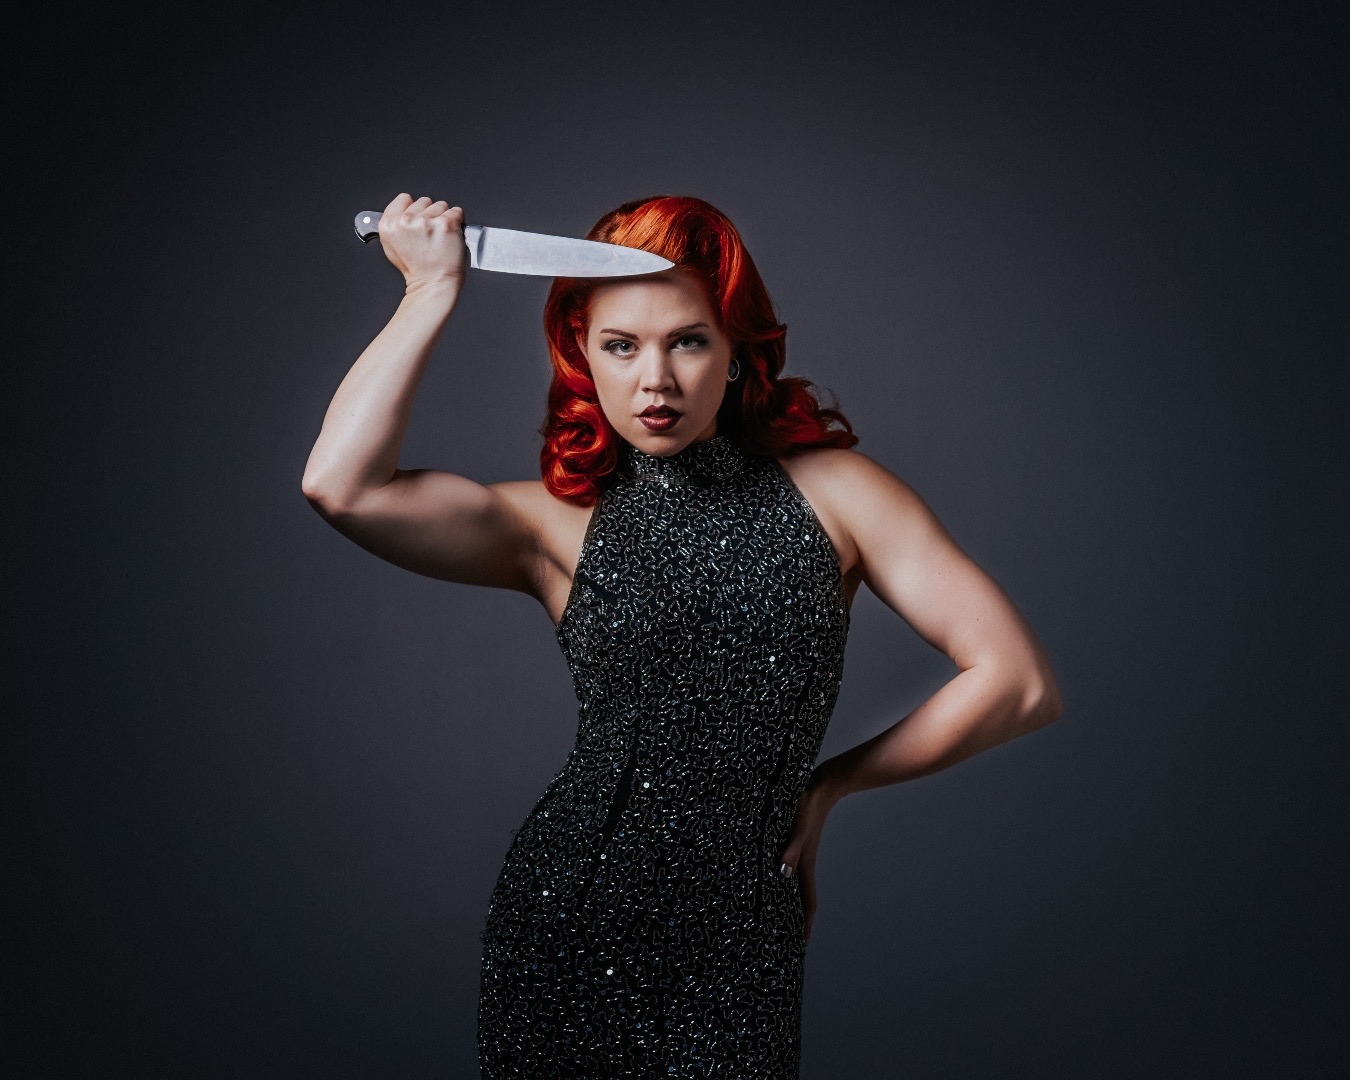 A sequin-clad burlesque dancer strikes a pose with a chef’s knife in hand